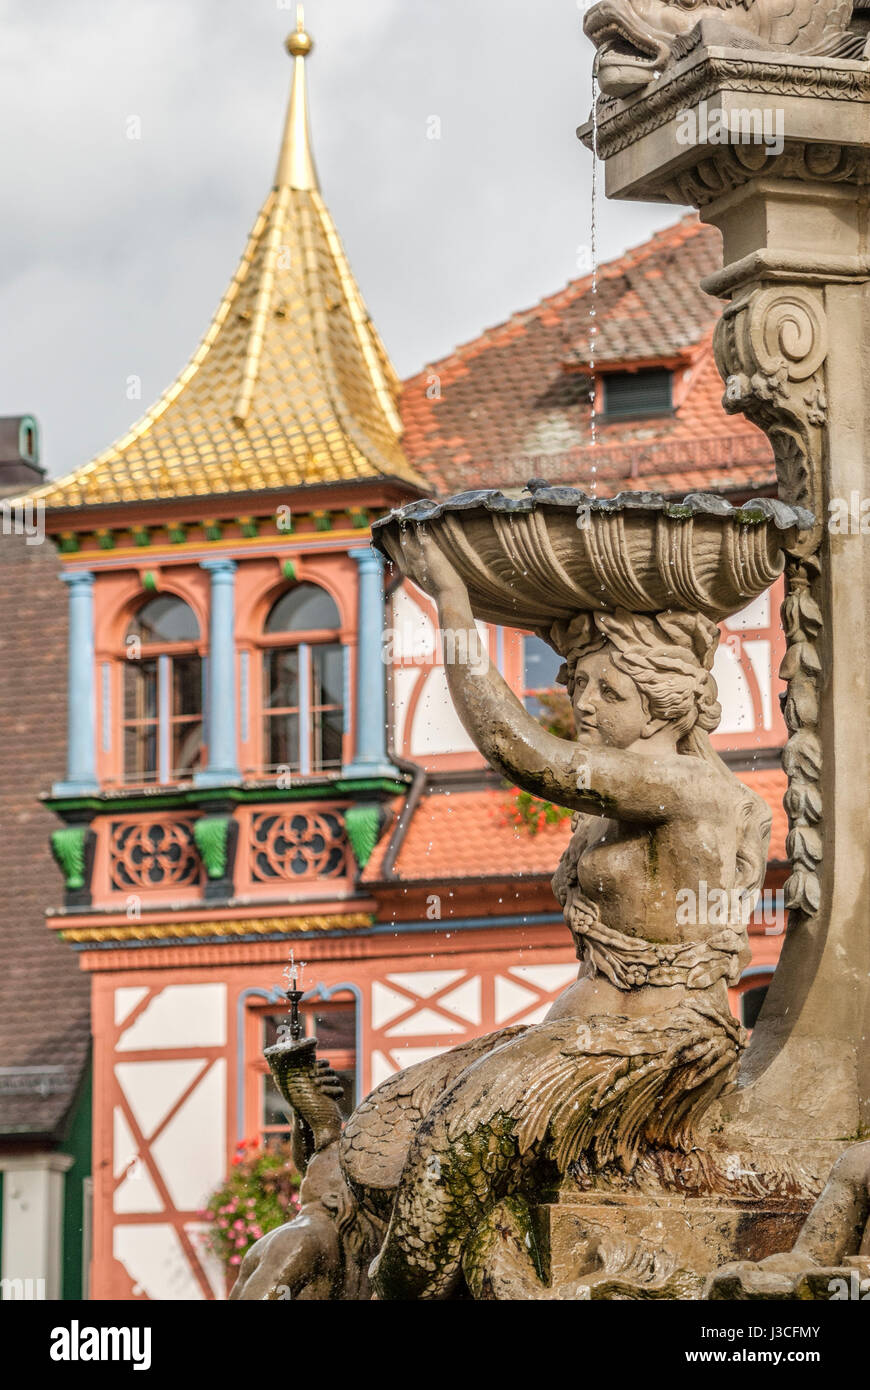 Detail of the Fountain at the Market place of Schwabach in Bavaria, Germany Stock Photo